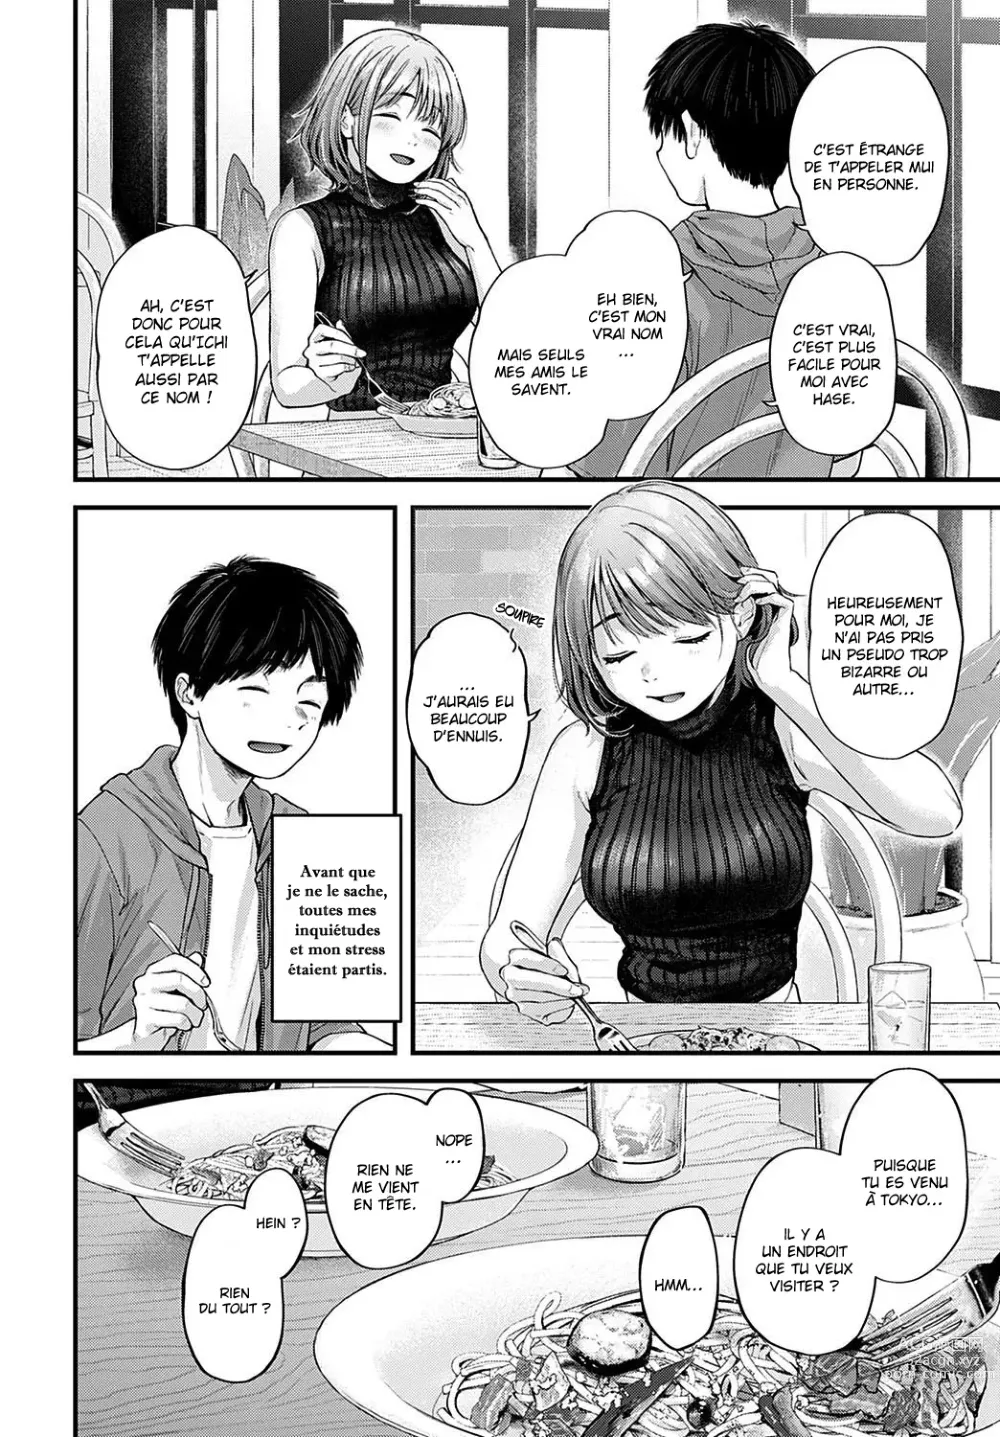 Page 6 of manga Tokyo Expedition Off-line Sex Report